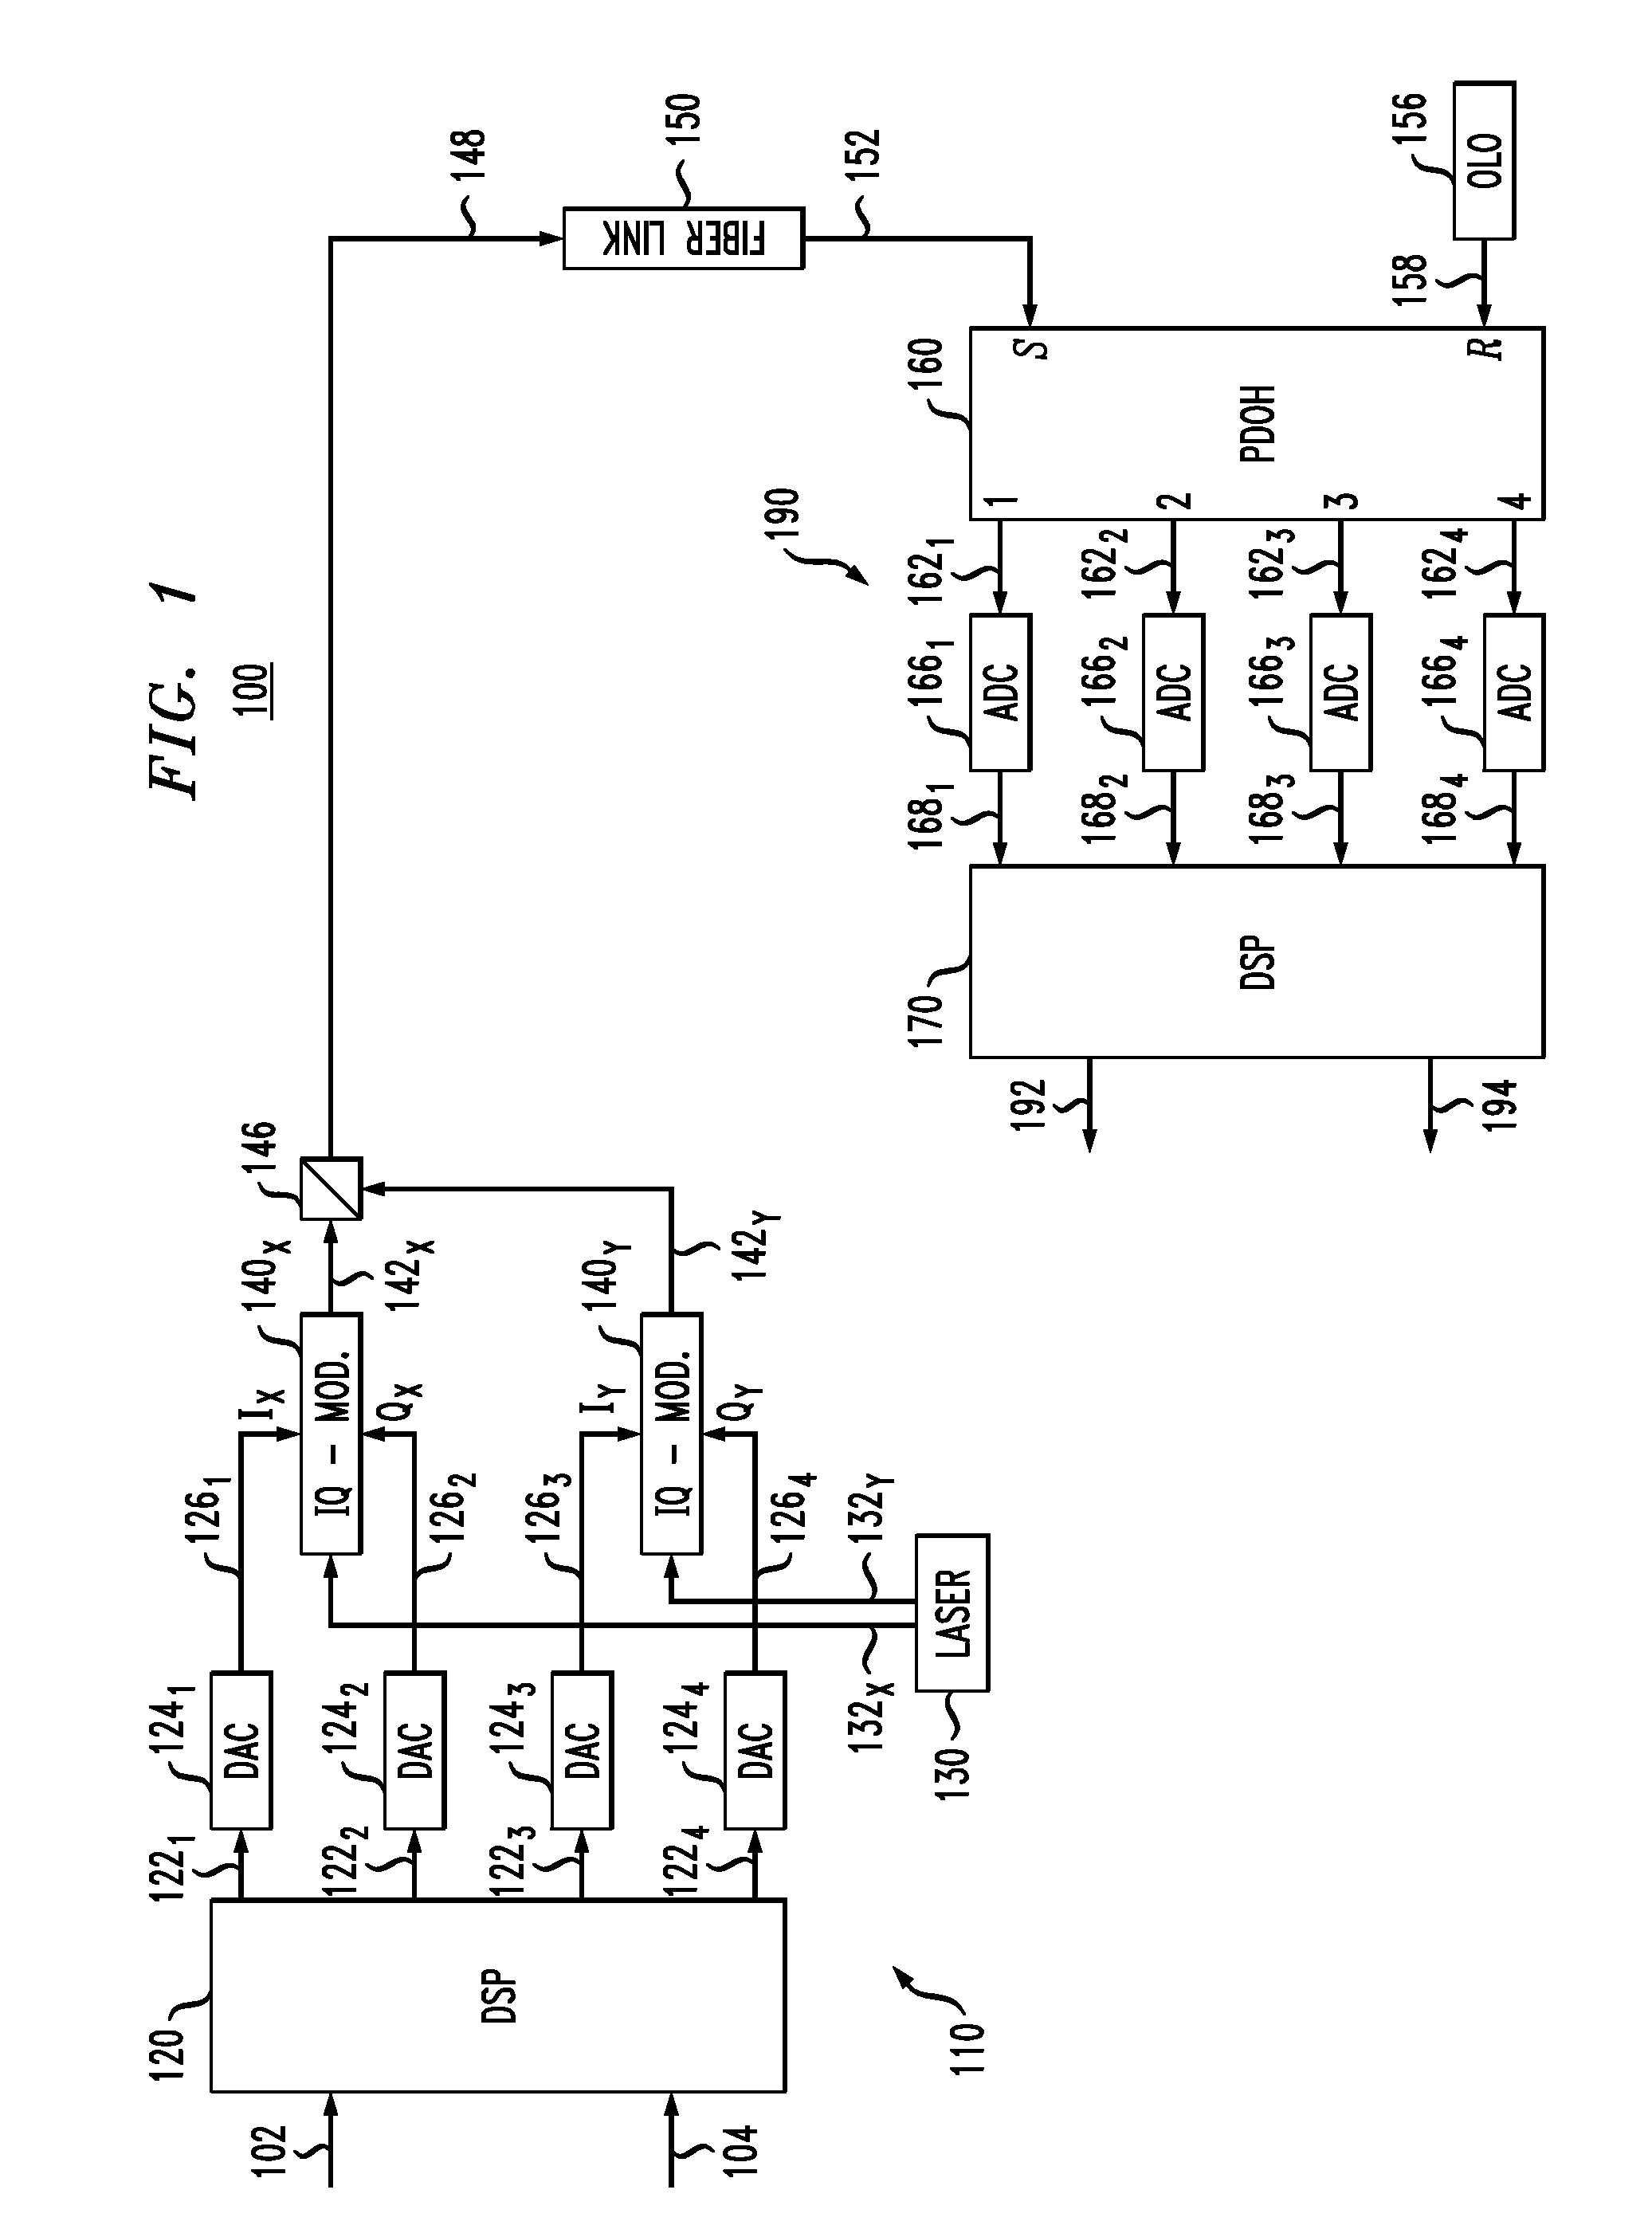 Coherent optical receiver for pilot-assisted data transmission